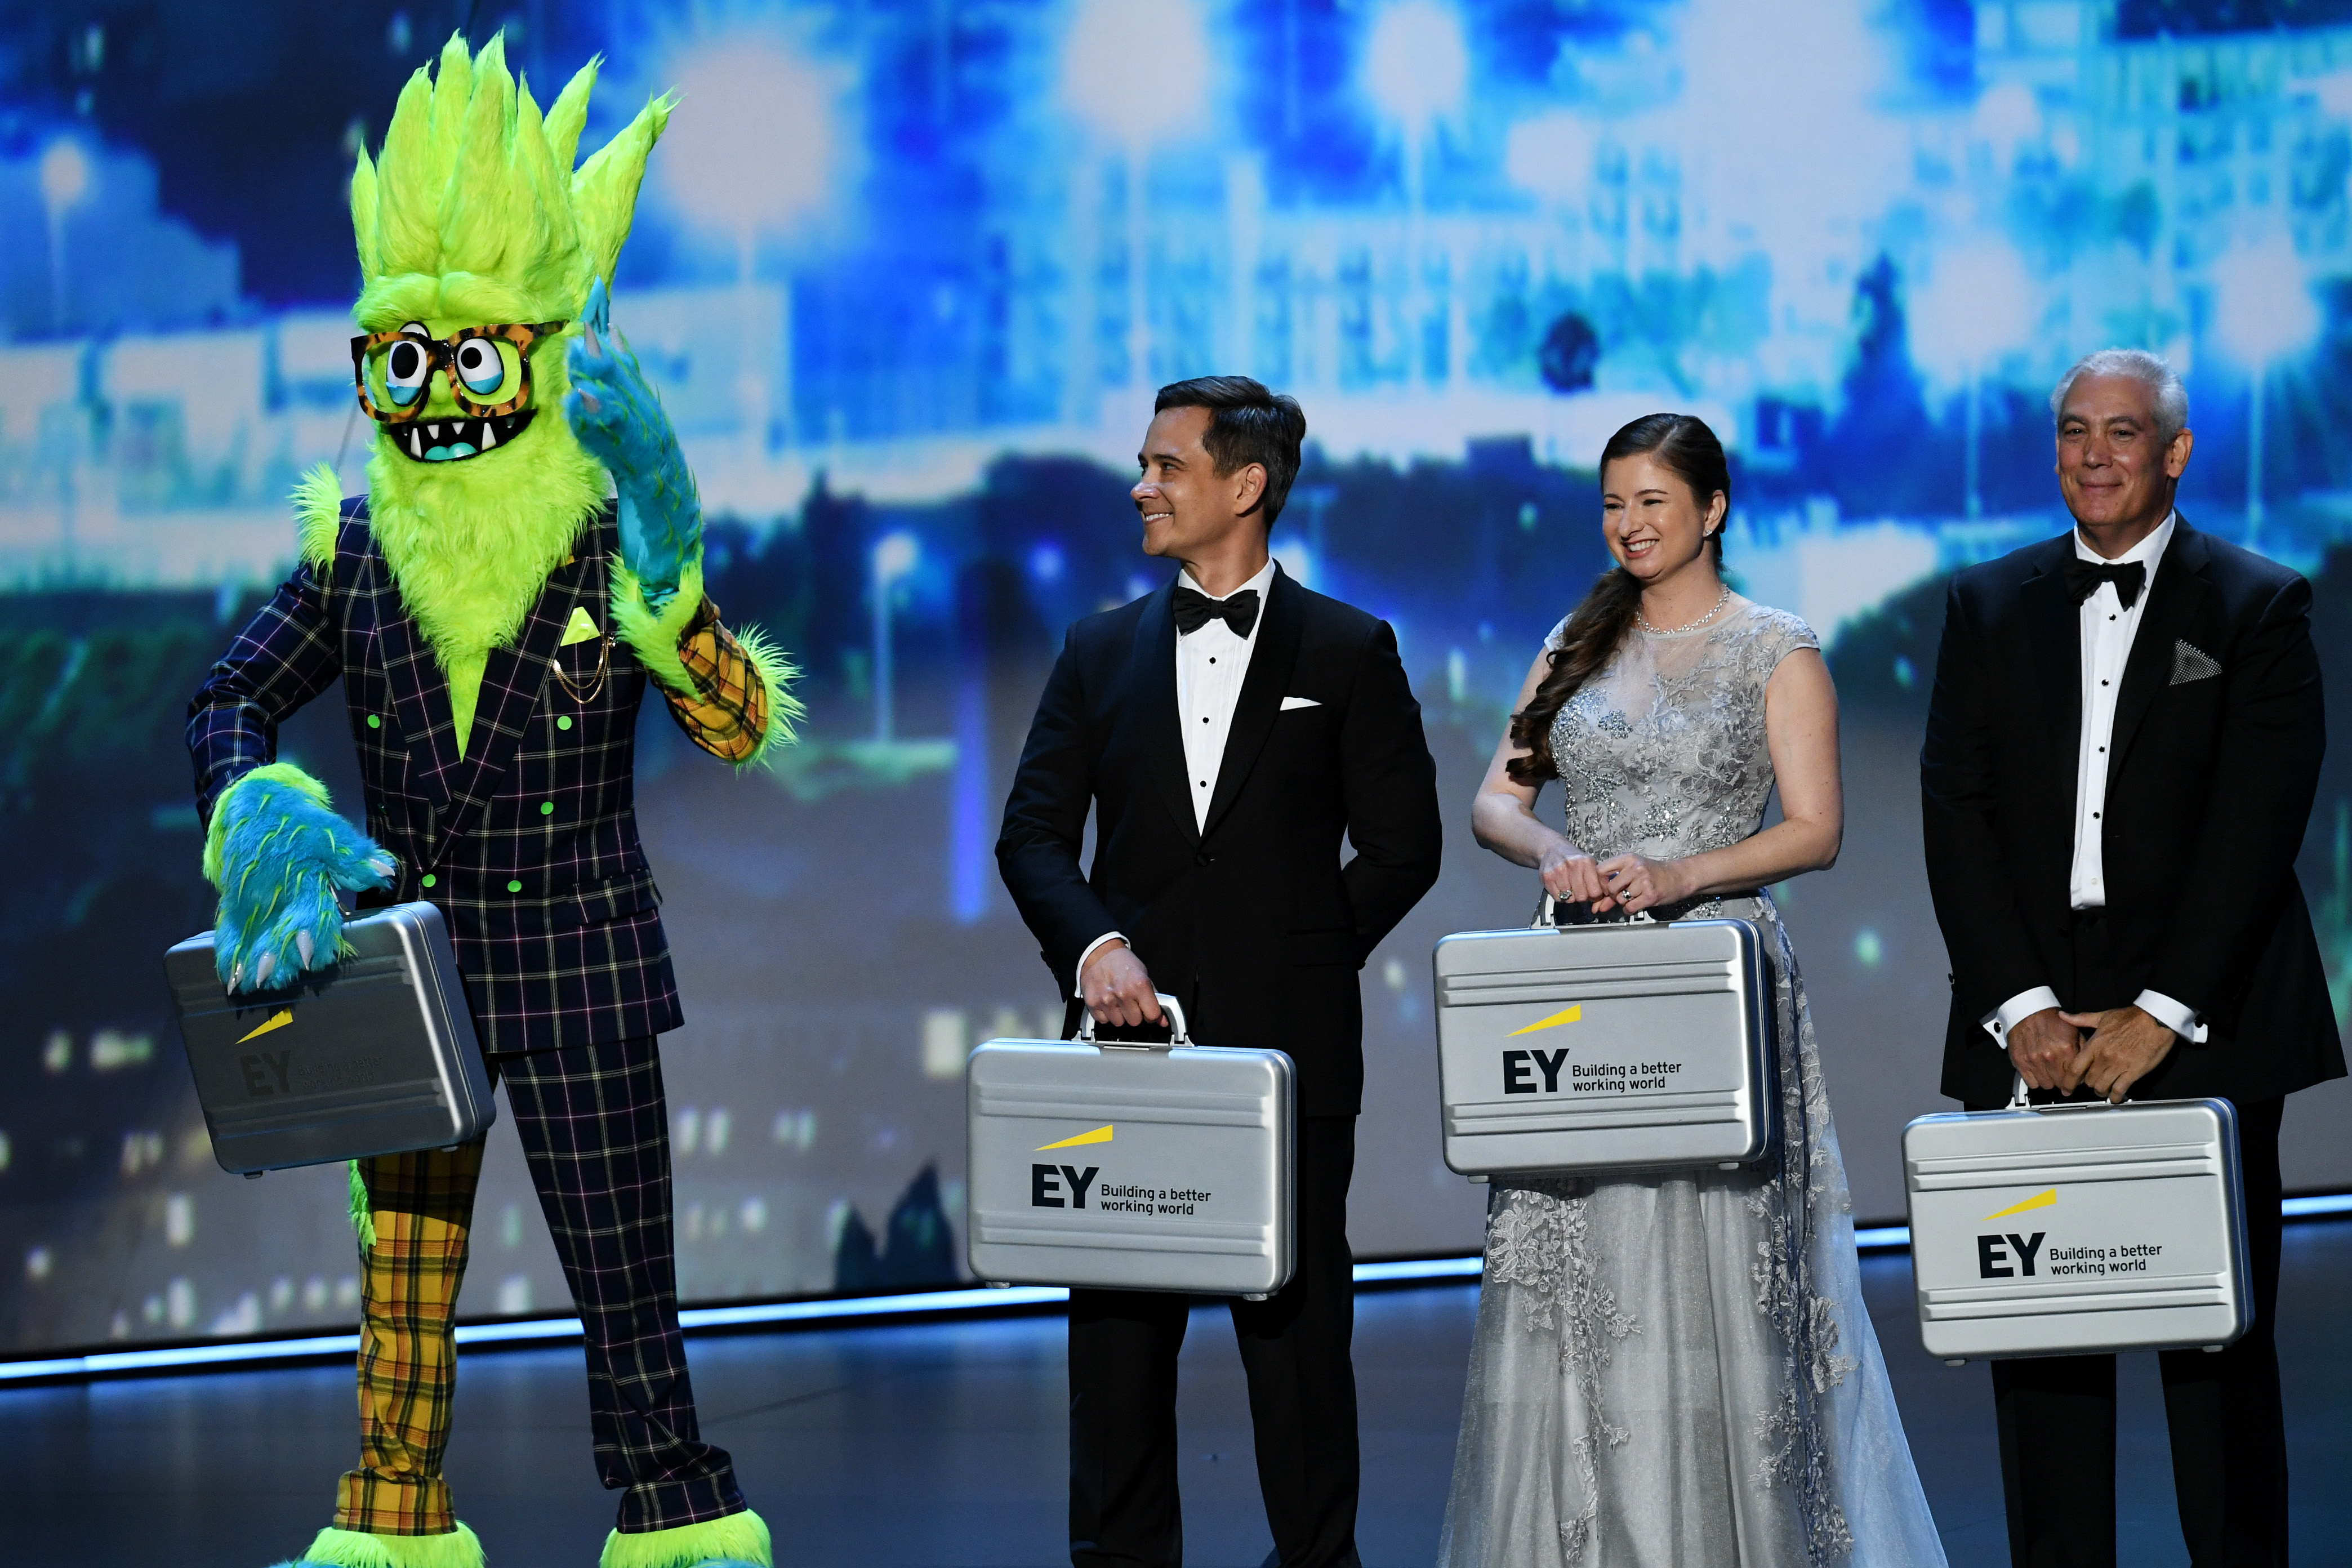 A character from 'The Masked Singer' and Ernst & Young representatives appear onstage during the 71st Emmy Awards. (Kevin Winter—Getty Images)